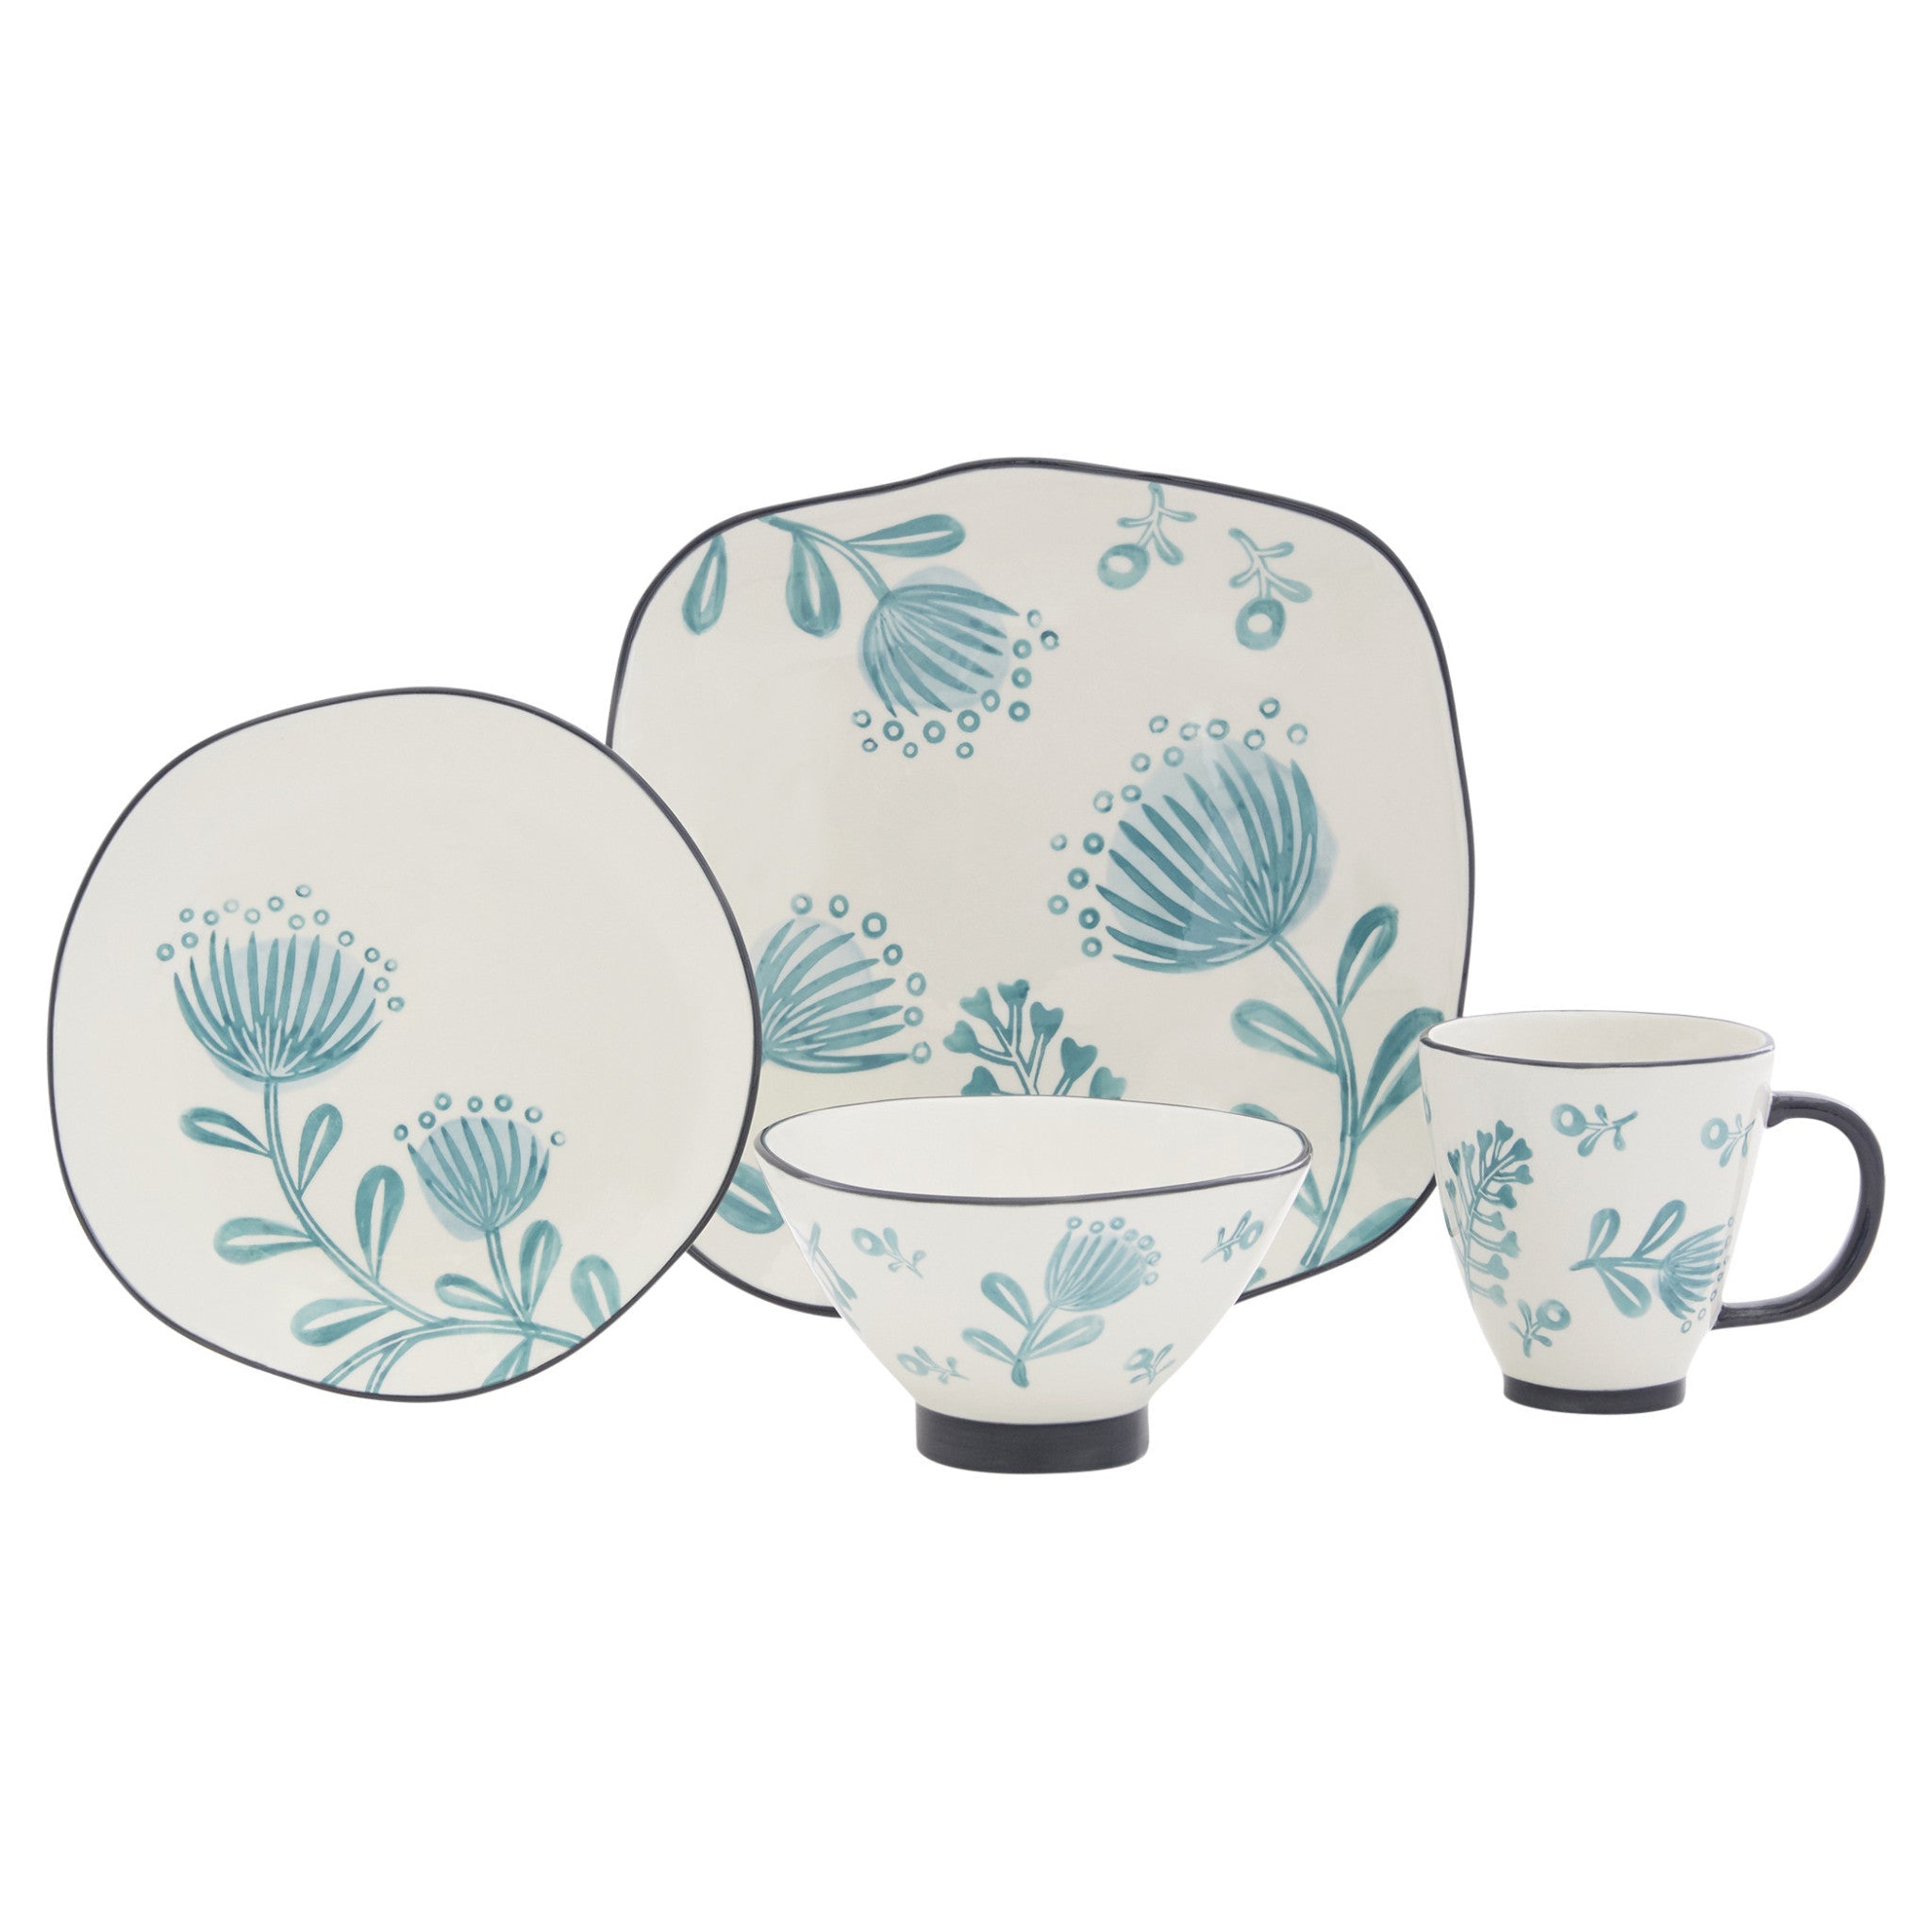 Blue-and-White-Sixteen-Piece-Round-Floral-Ceramic-Service-For-Four-Dinnerware-Set-Dinnerware-Sets